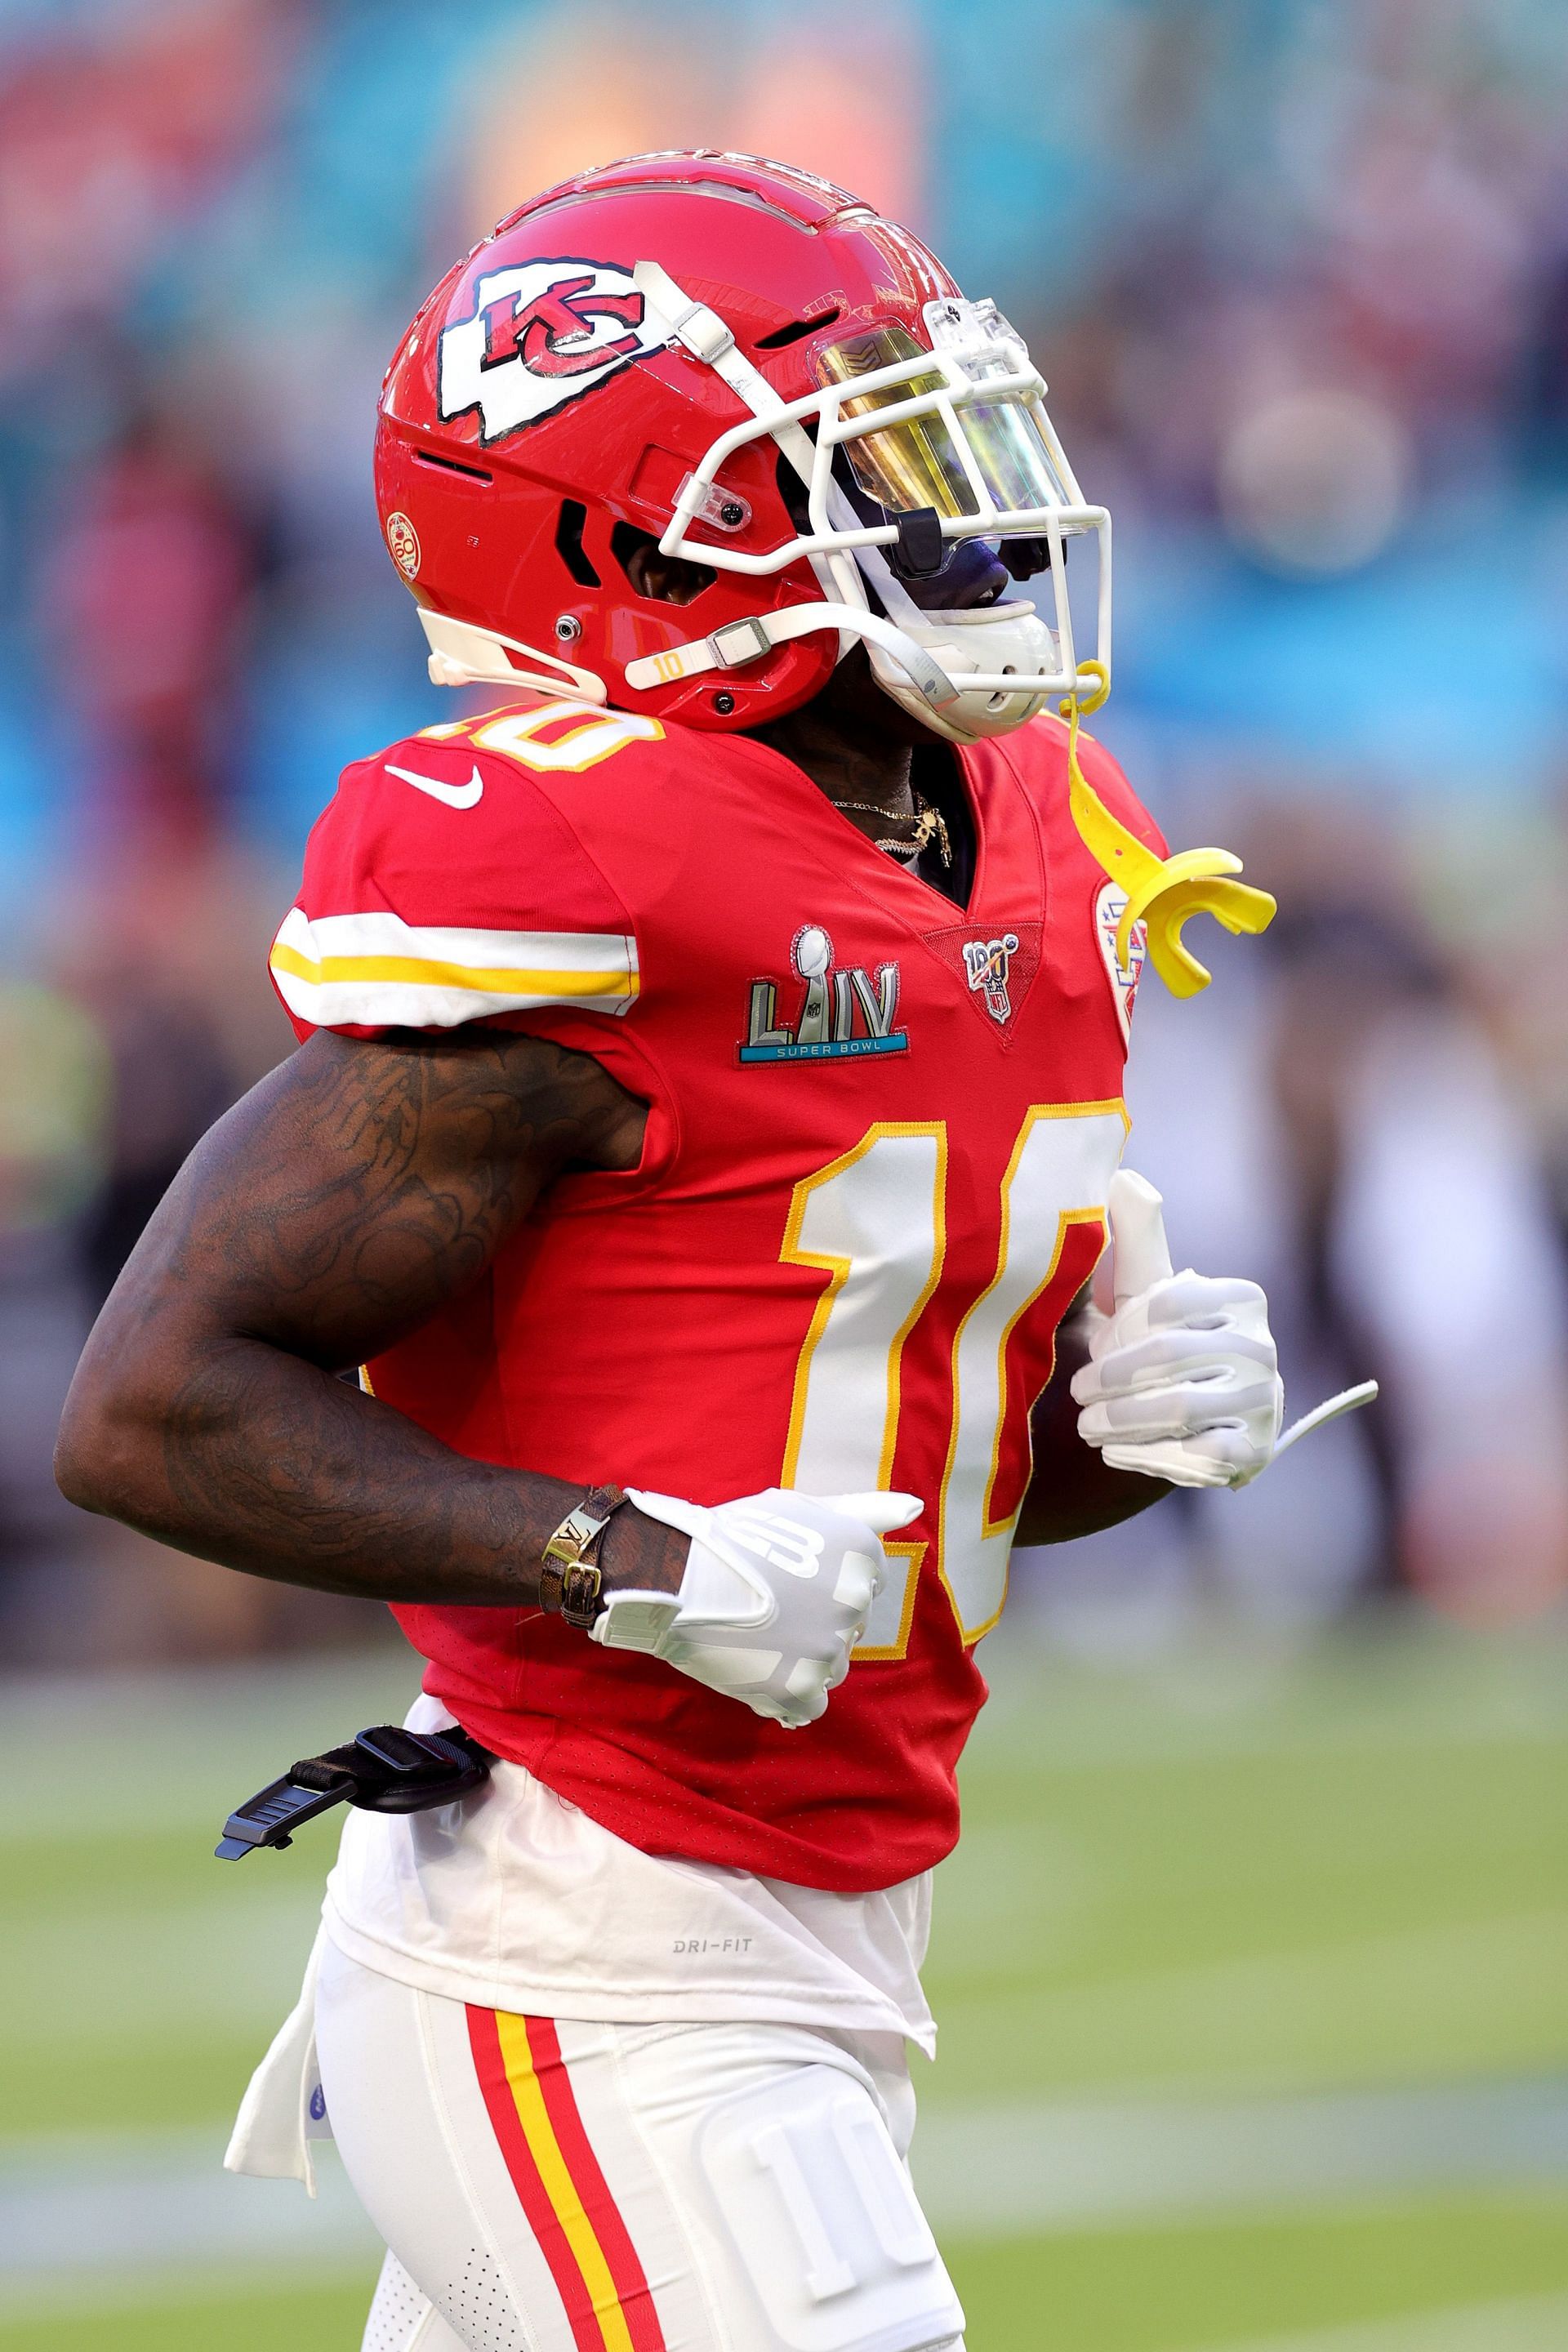 Is Tyreek Hill playing tonight against the WFT?